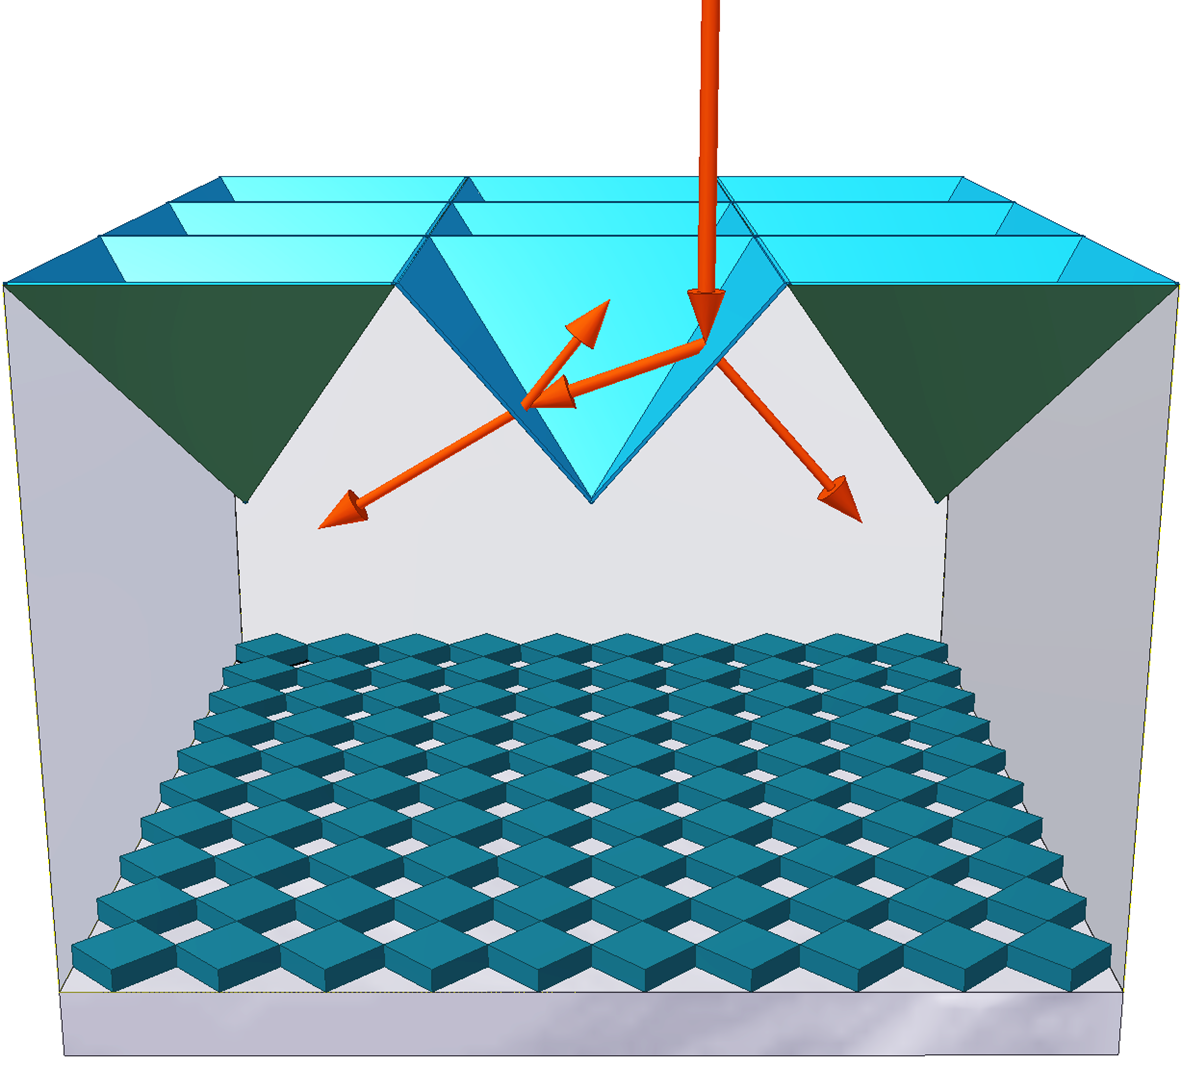 Sketch of a textured silicon solar cell with inverted pyramids on the front side and diffraction grating on the rear side.